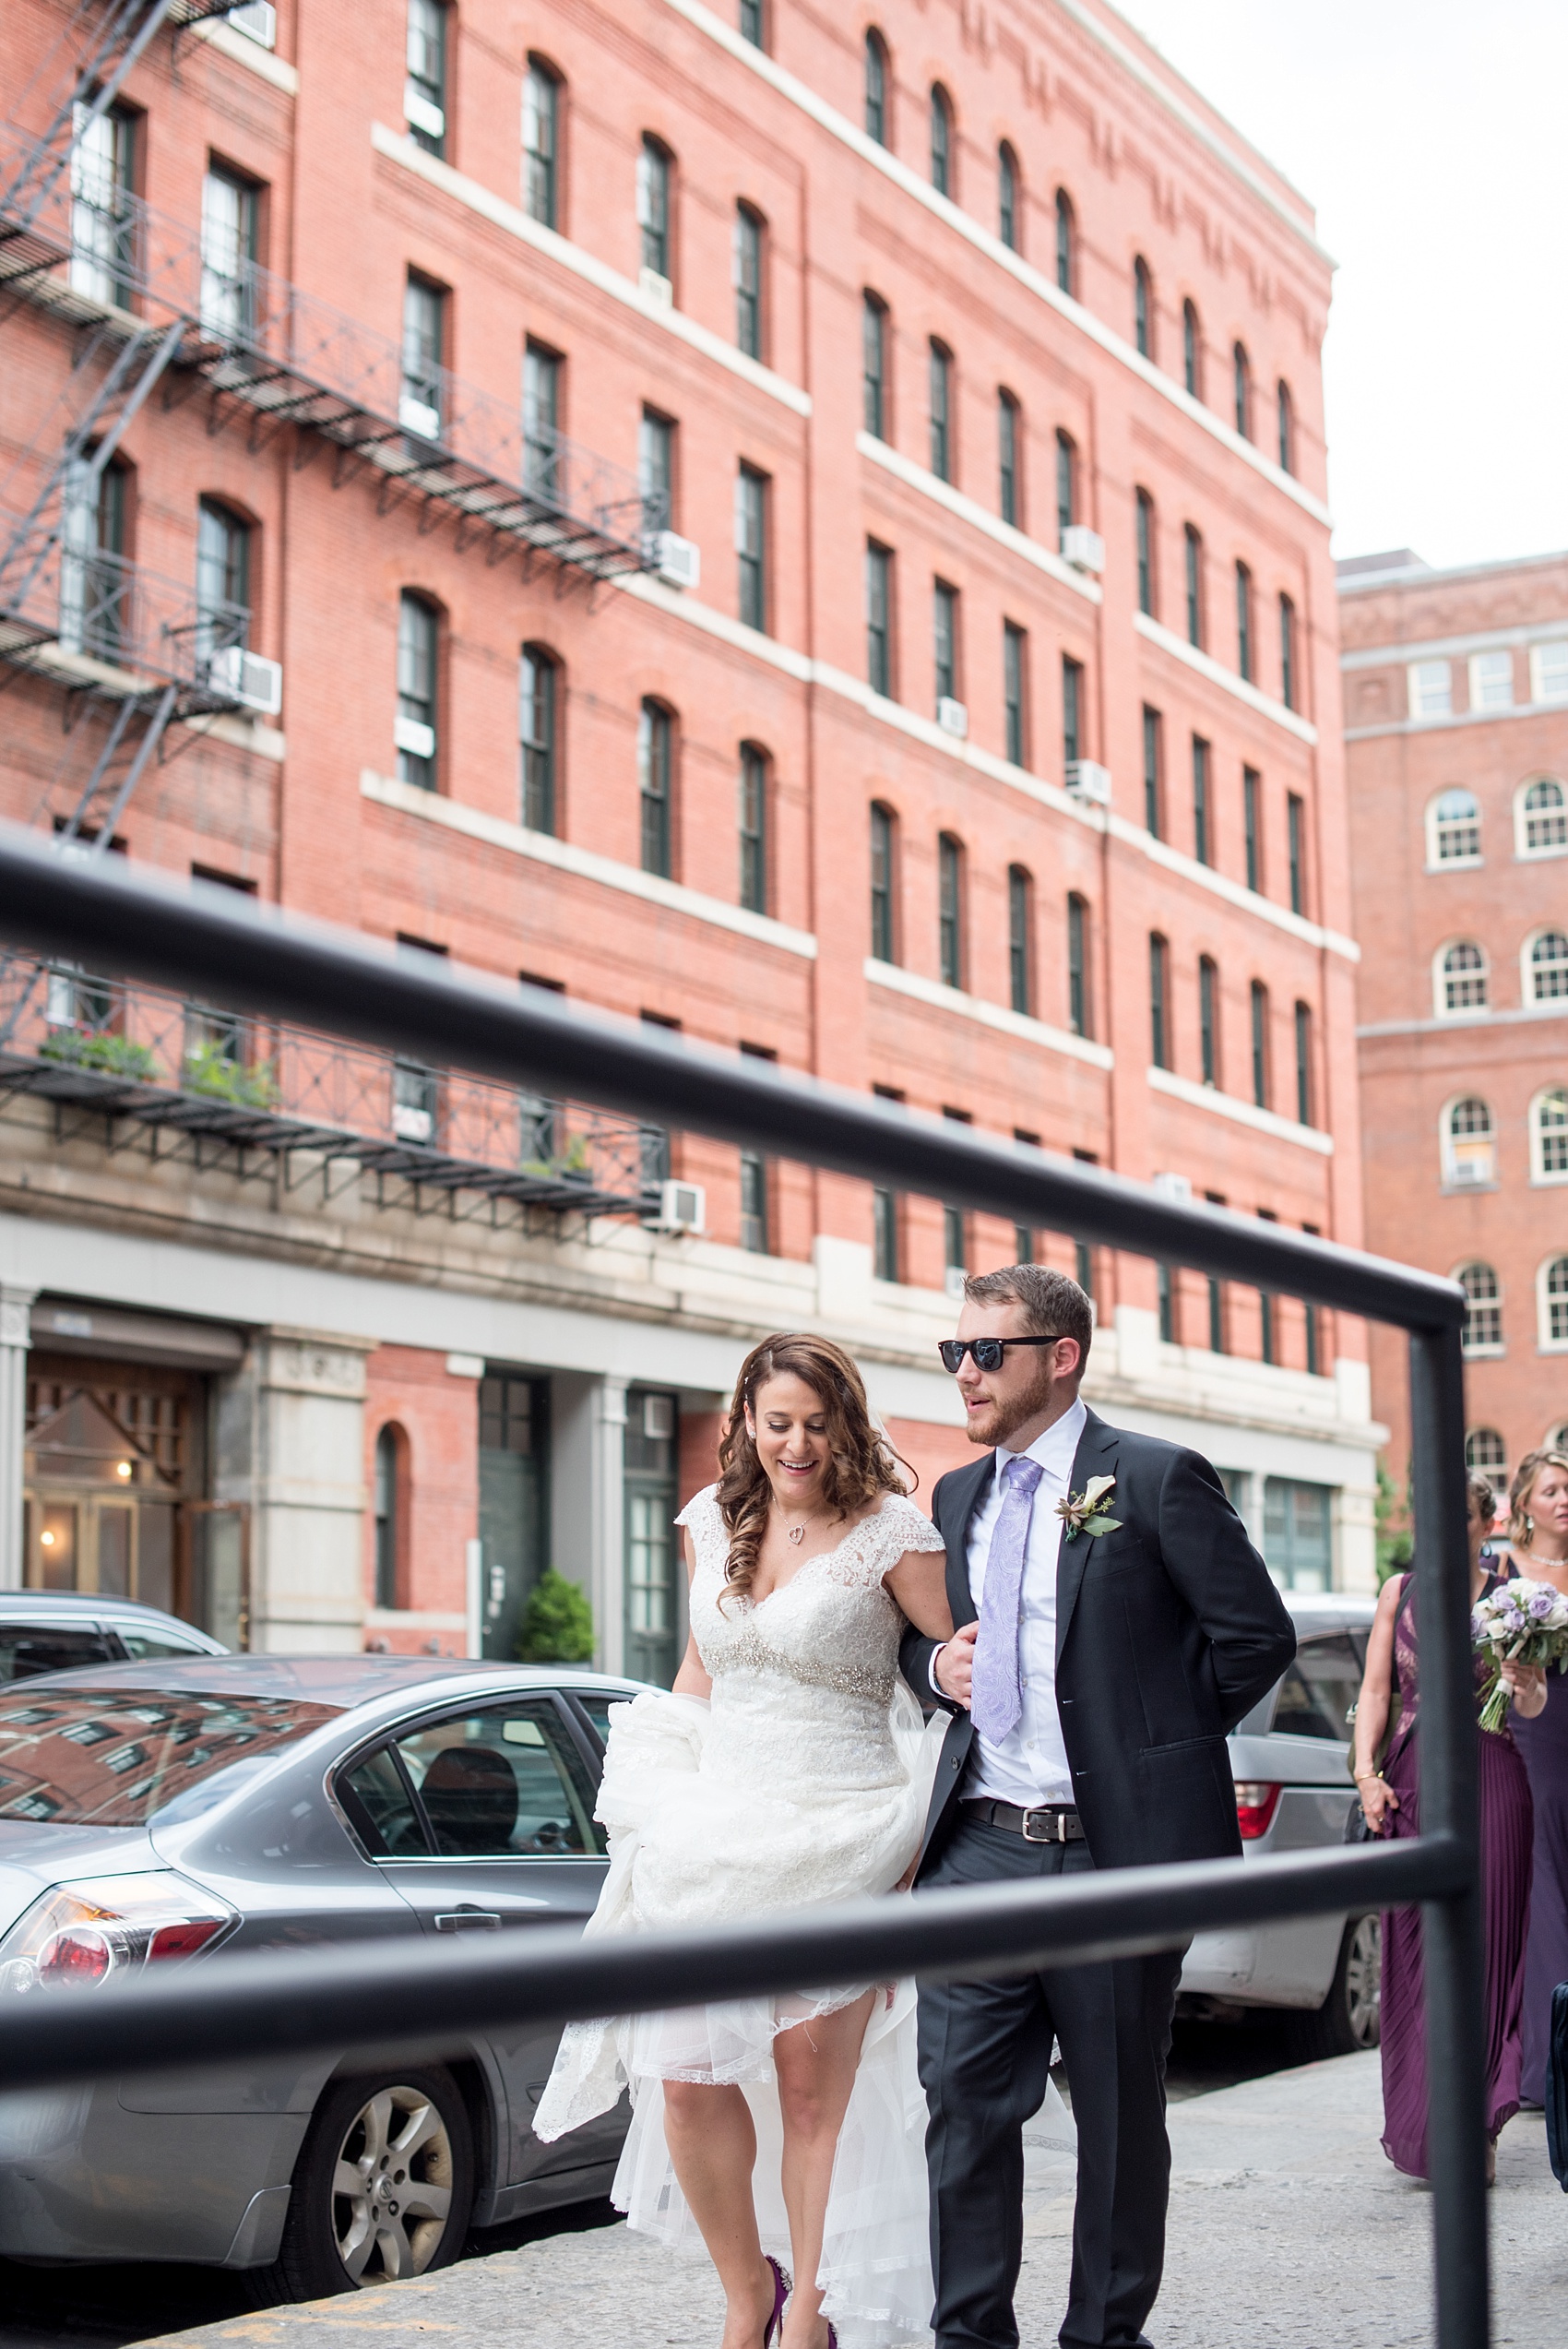 Mikkel Paige Photography photos of a NYC wedding at Tribeca Rooftop. An urban image of the bride and groom on the streets of New York.